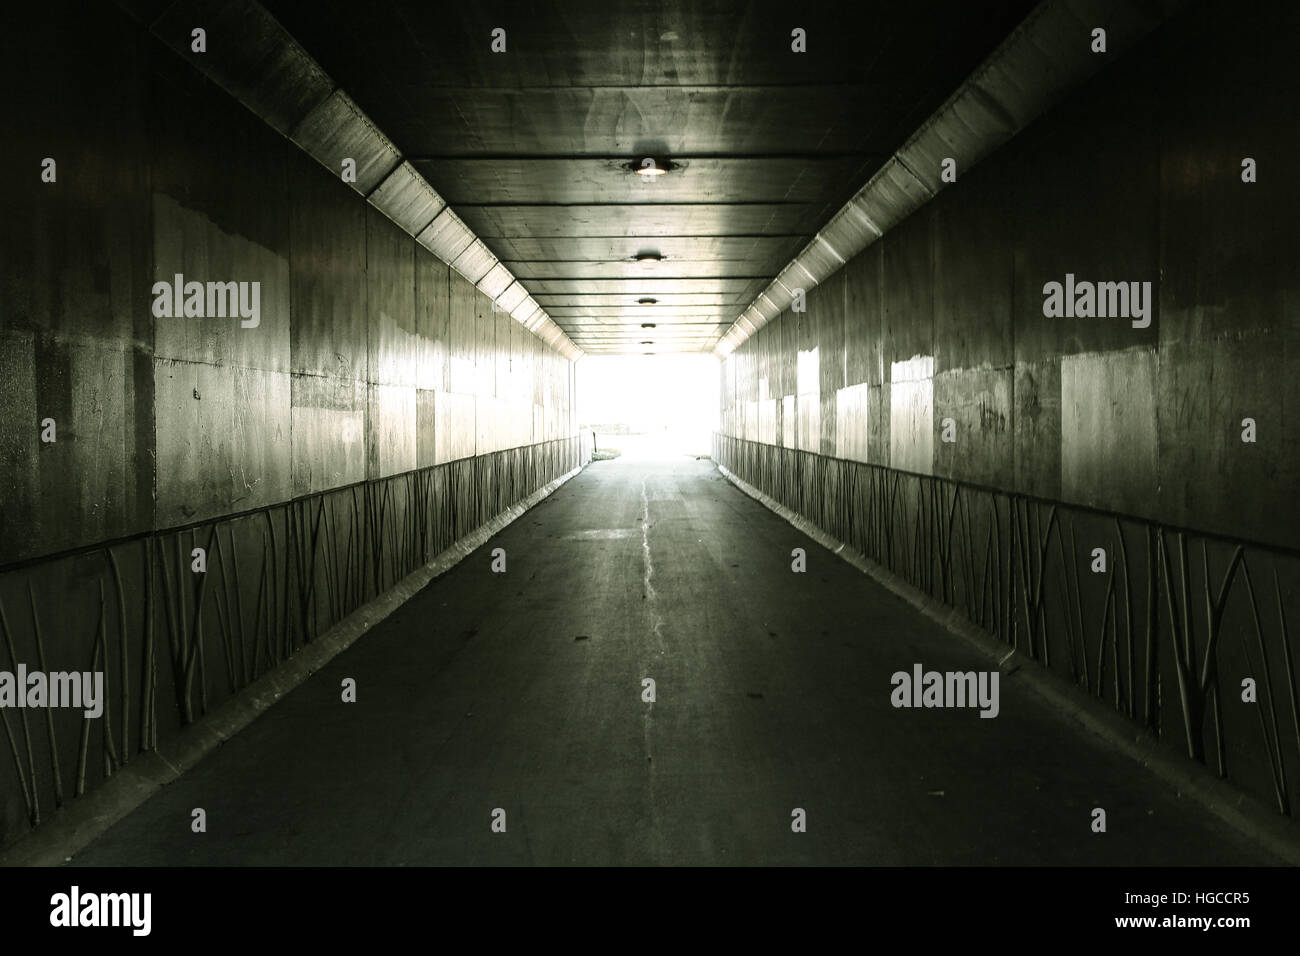 Light At The End Of The Tunnel Pedestrian tunnel illuminated by bright sunlight at the exit Stock Photo